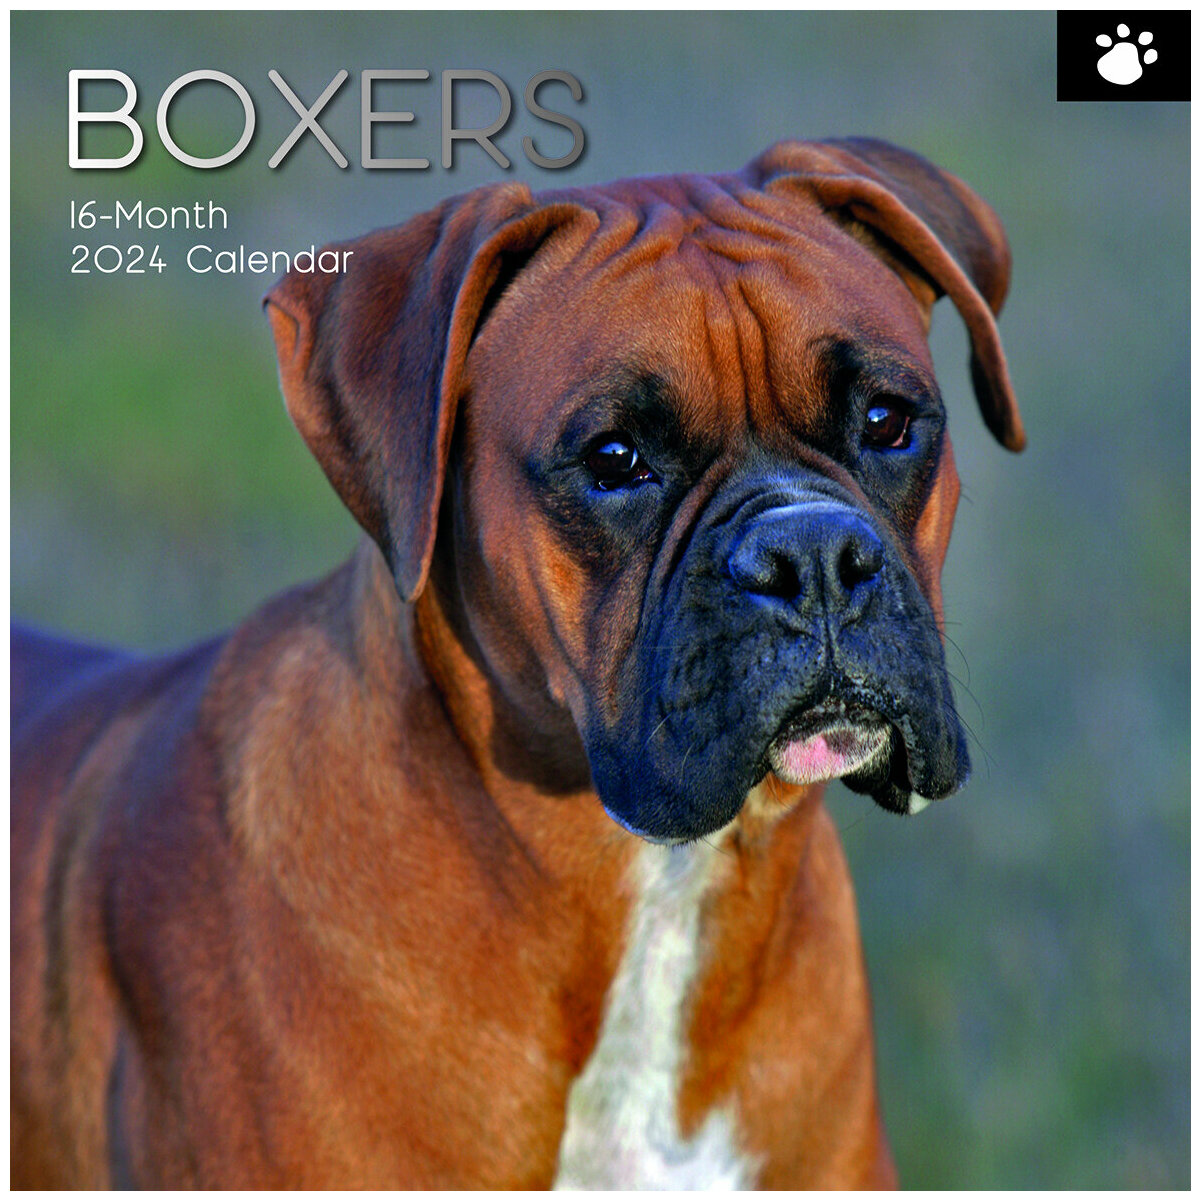 Boxer - Calendriers 2024